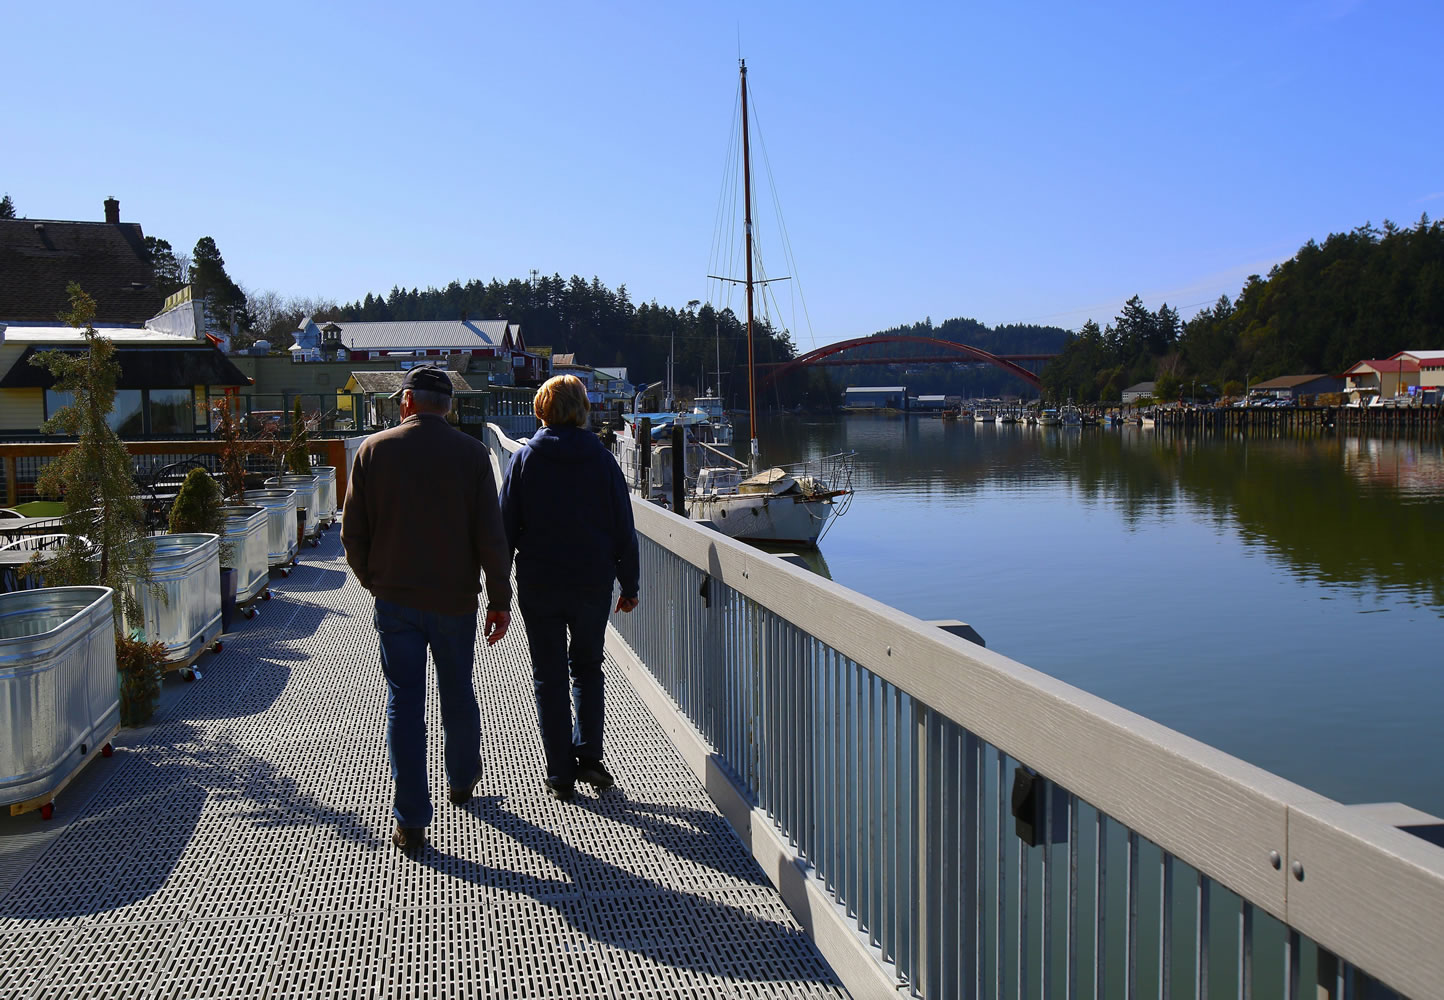 A new boardwalk provides easy access to the La Conner waterfront along the Swinomish Channel.